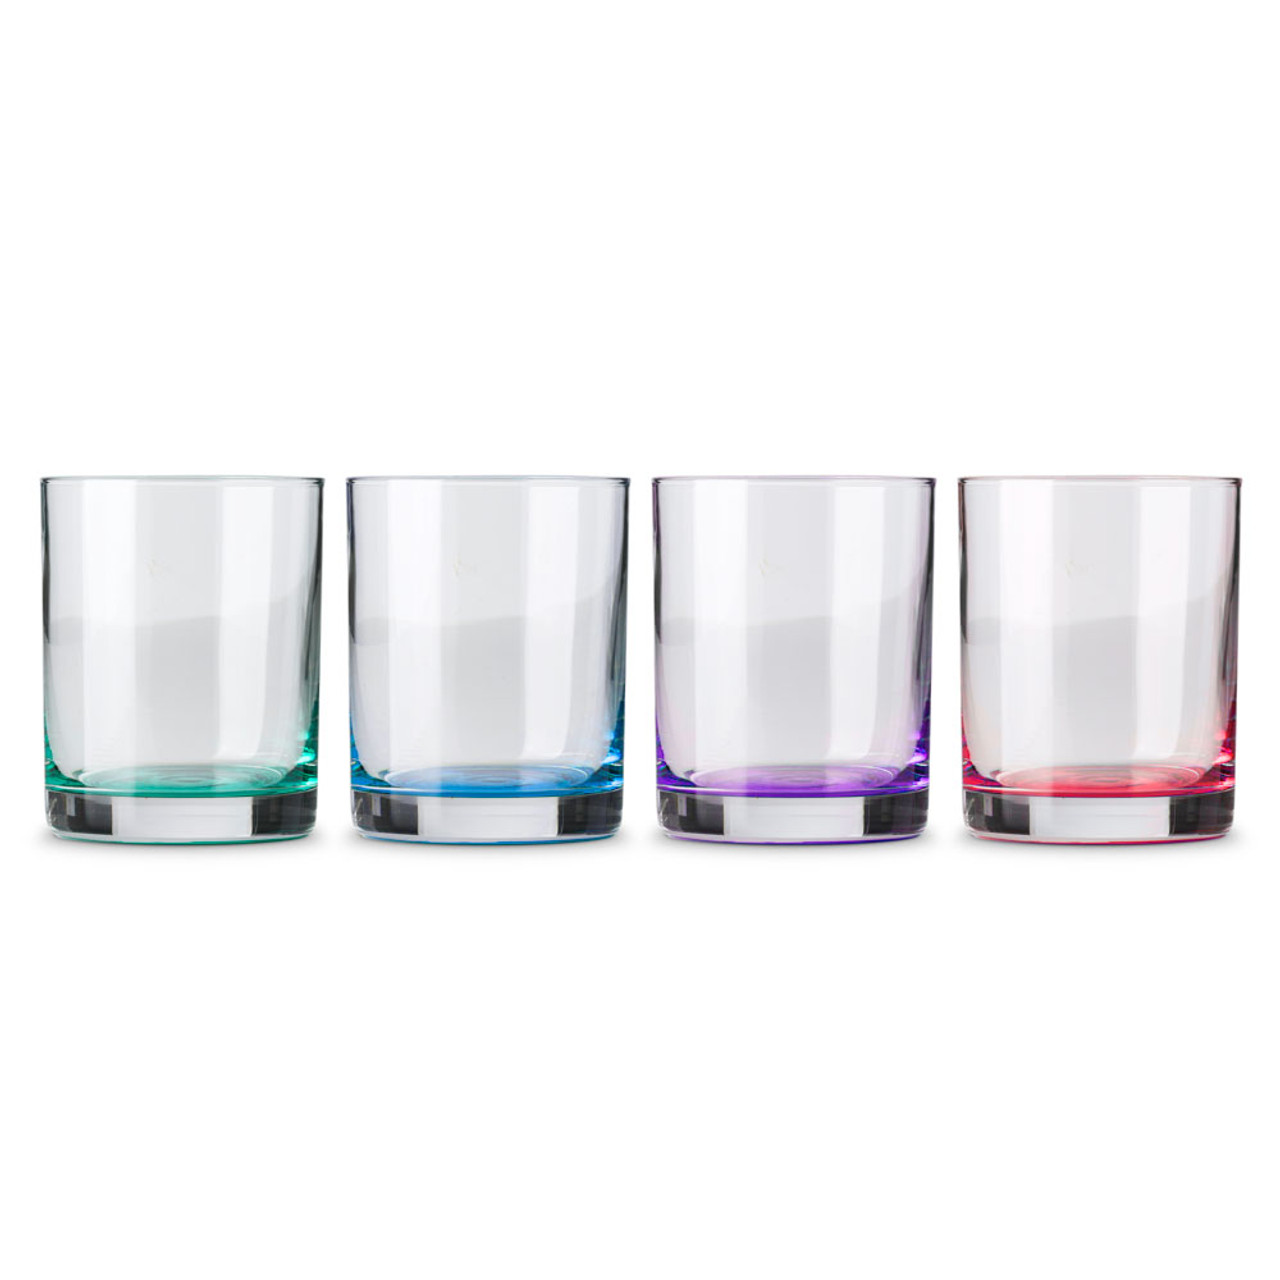 https://cdn11.bigcommerce.com/s-cznxq08r7/images/stencil/1280x1280/products/5353/14571/SMG000031_Multi_Colored_All_Purpose_DOF_Drinking_Glasses_-_11.75_oz_-_Set_of_4_02__90507.1654452987.jpg?c=1